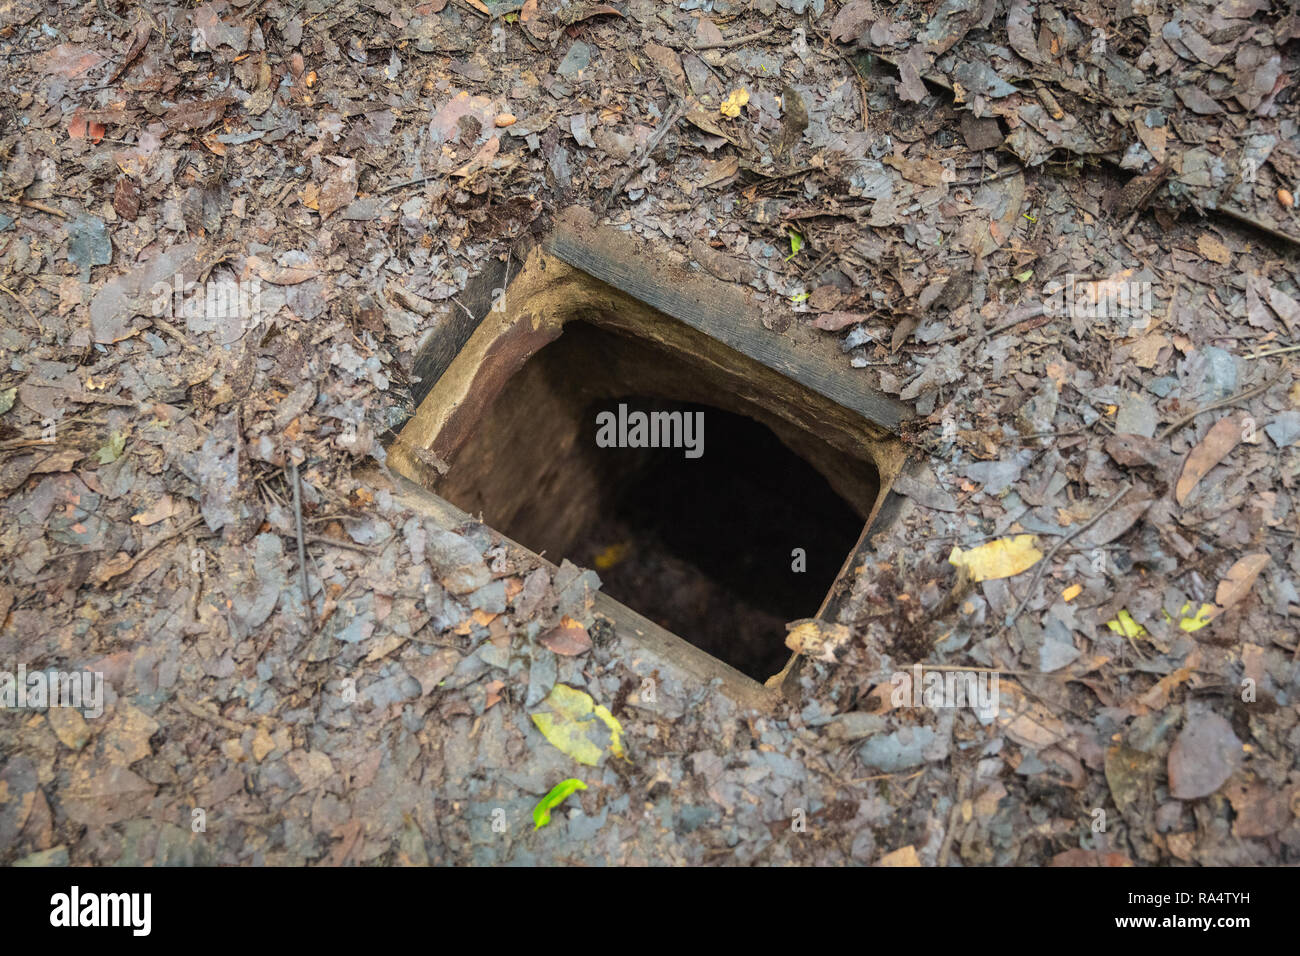 The Cu Chi Tunnels A Subterranean Saga of Resilience and Ingenuity